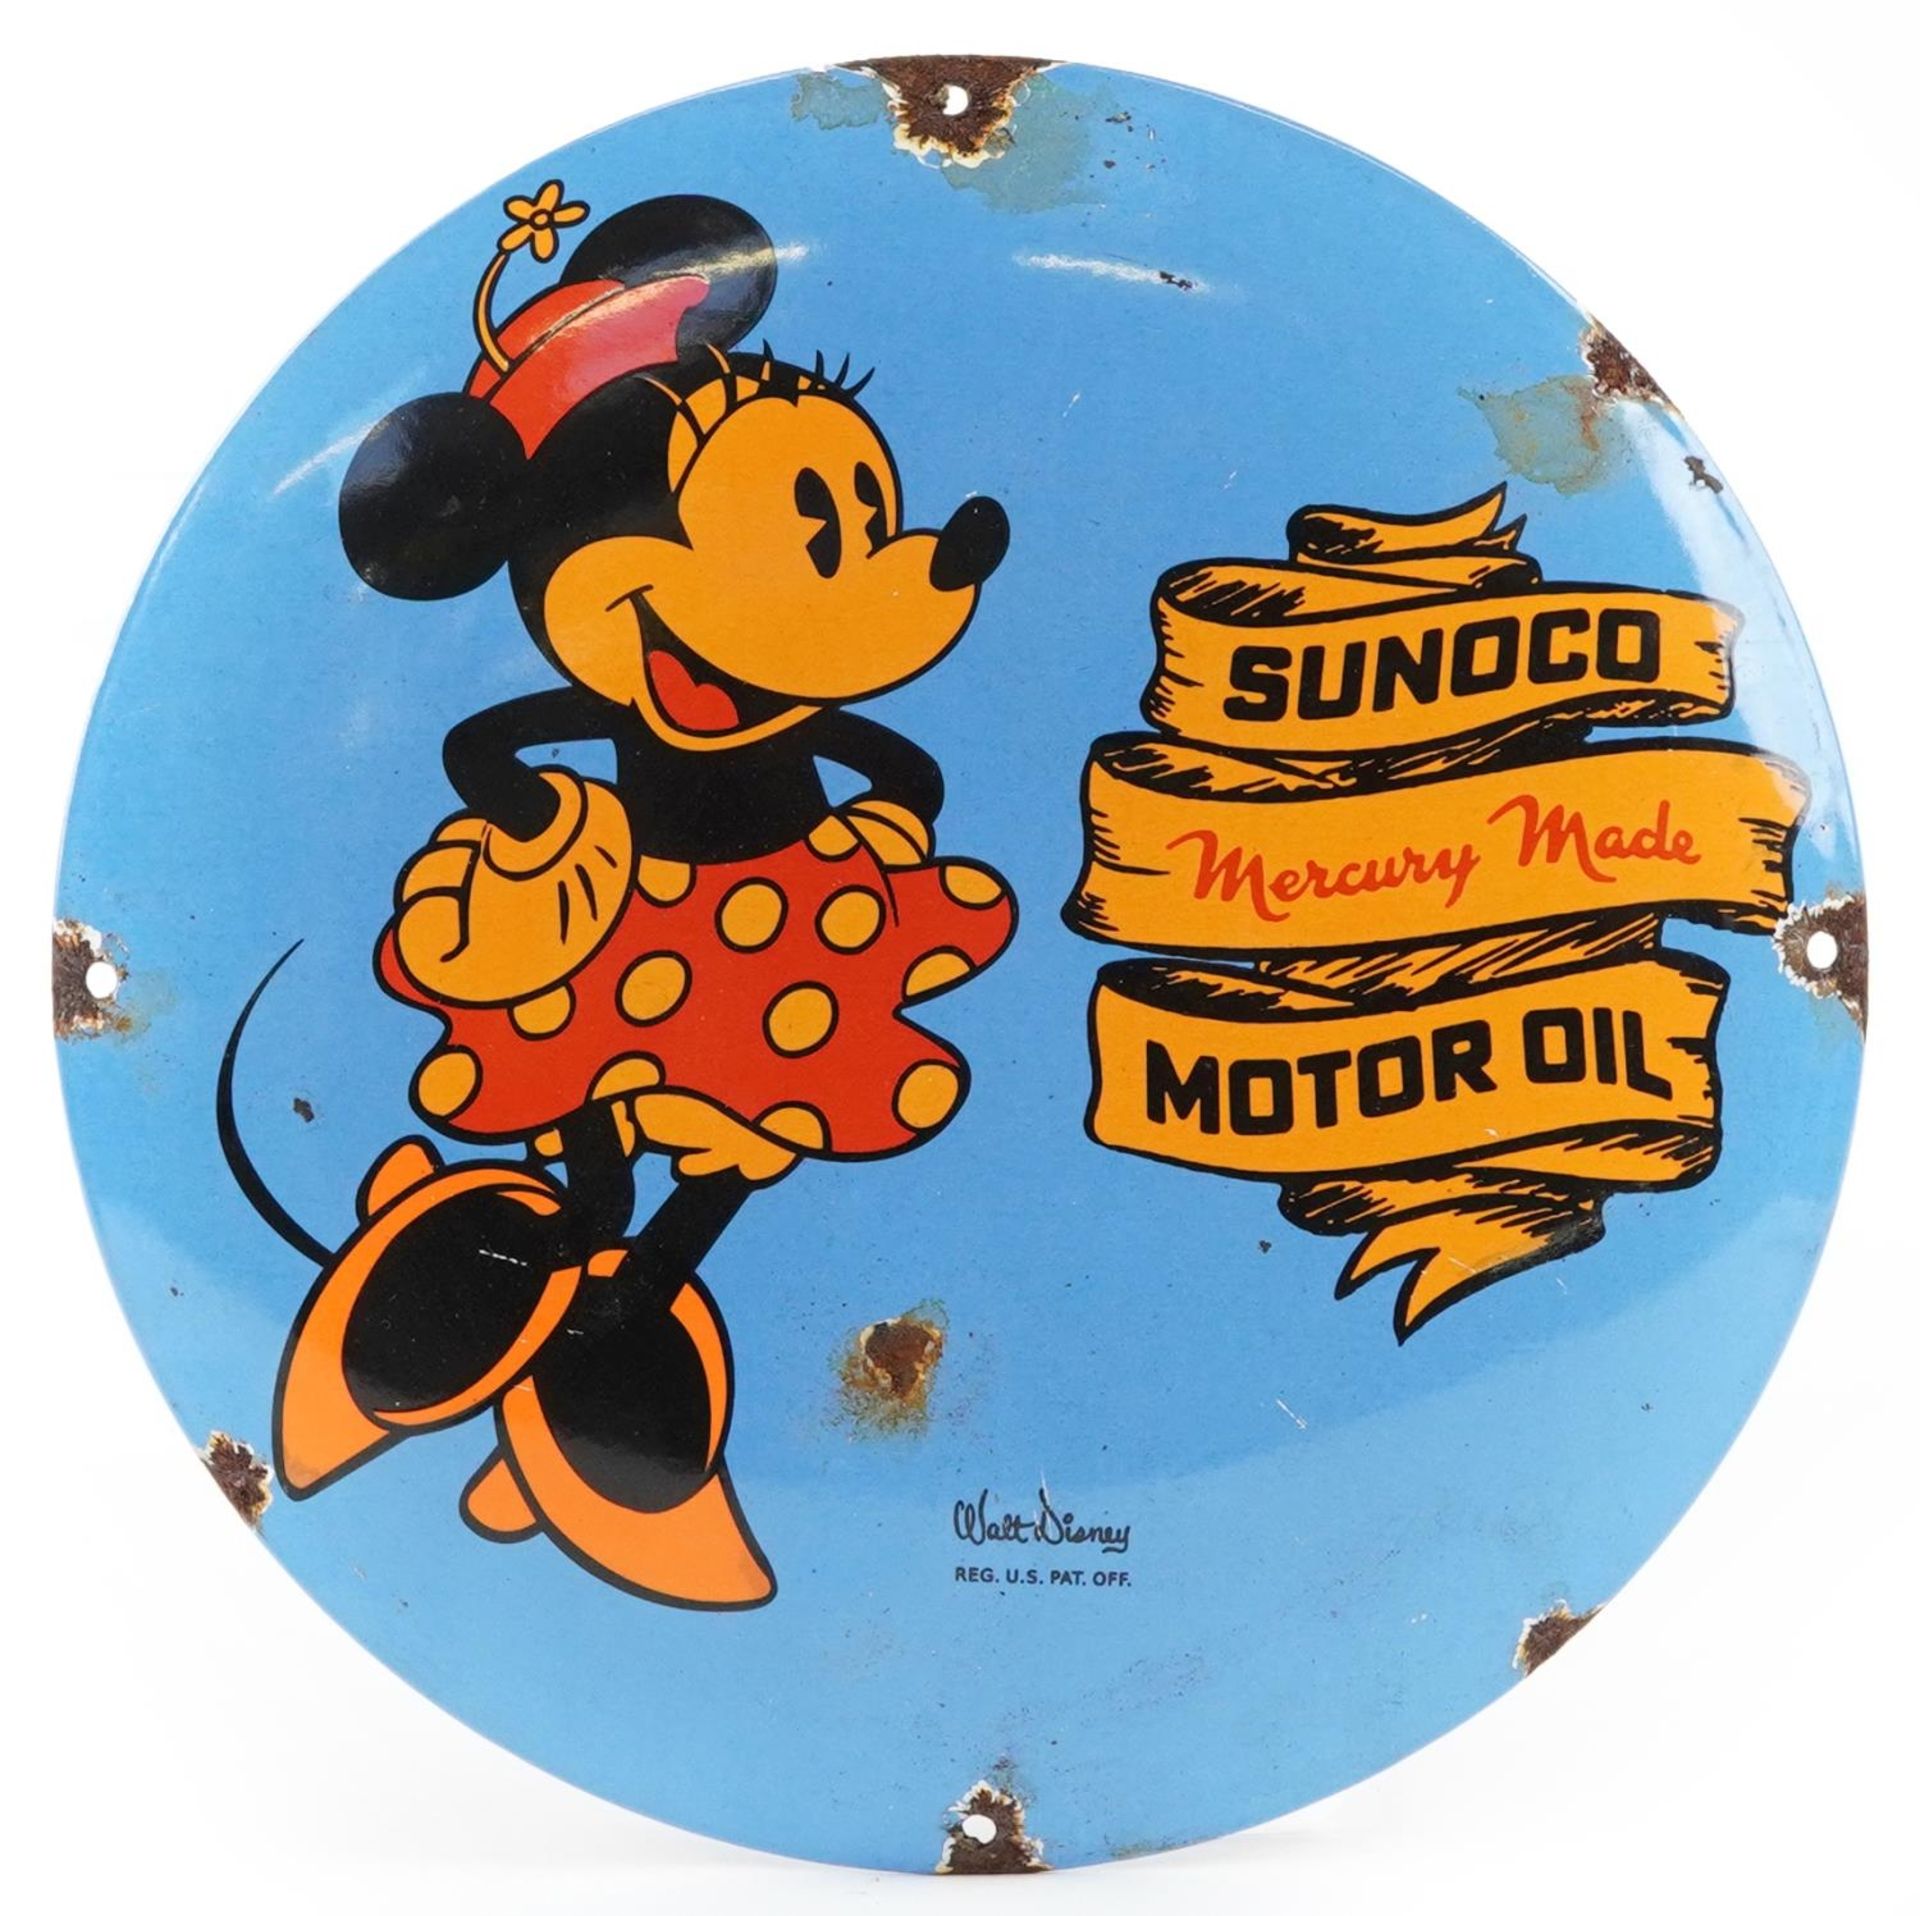 Automobilia interest Sunoco Motor Oil convex enamel advertising sign with Minnie Mouse, 30cm in